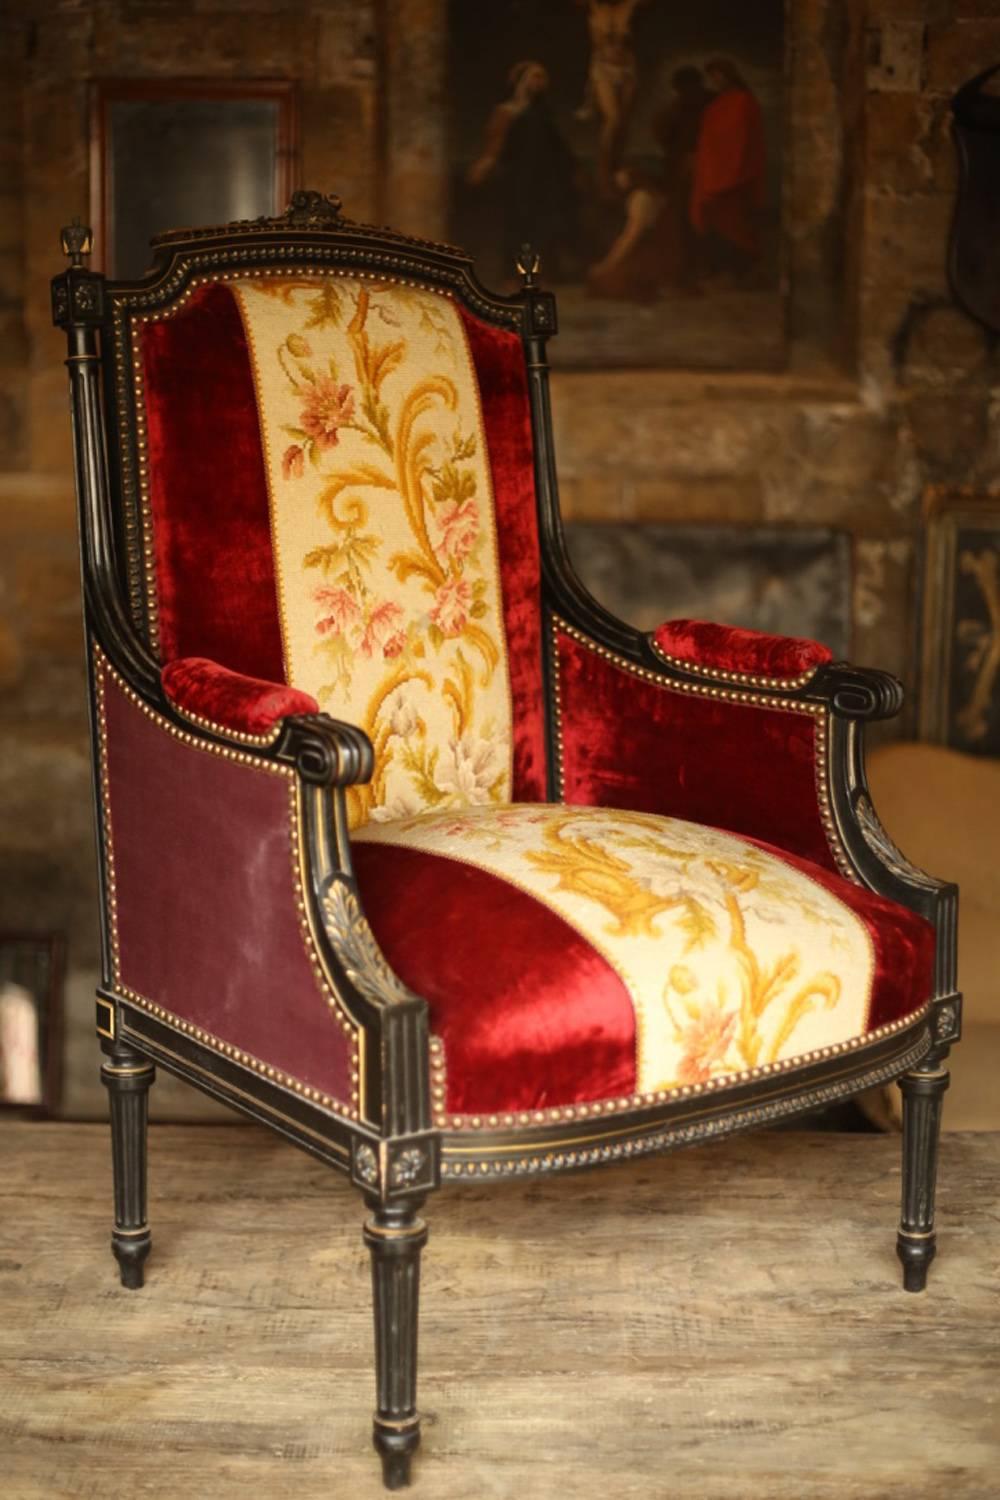 This is an exceptional pair of totally original 19th century velvet upholstered throne chairs. They have a very stylish ebonised and worn gilt frame. Beautifully carved columned tapered legs. Small floral details all-over the frame one small loss on